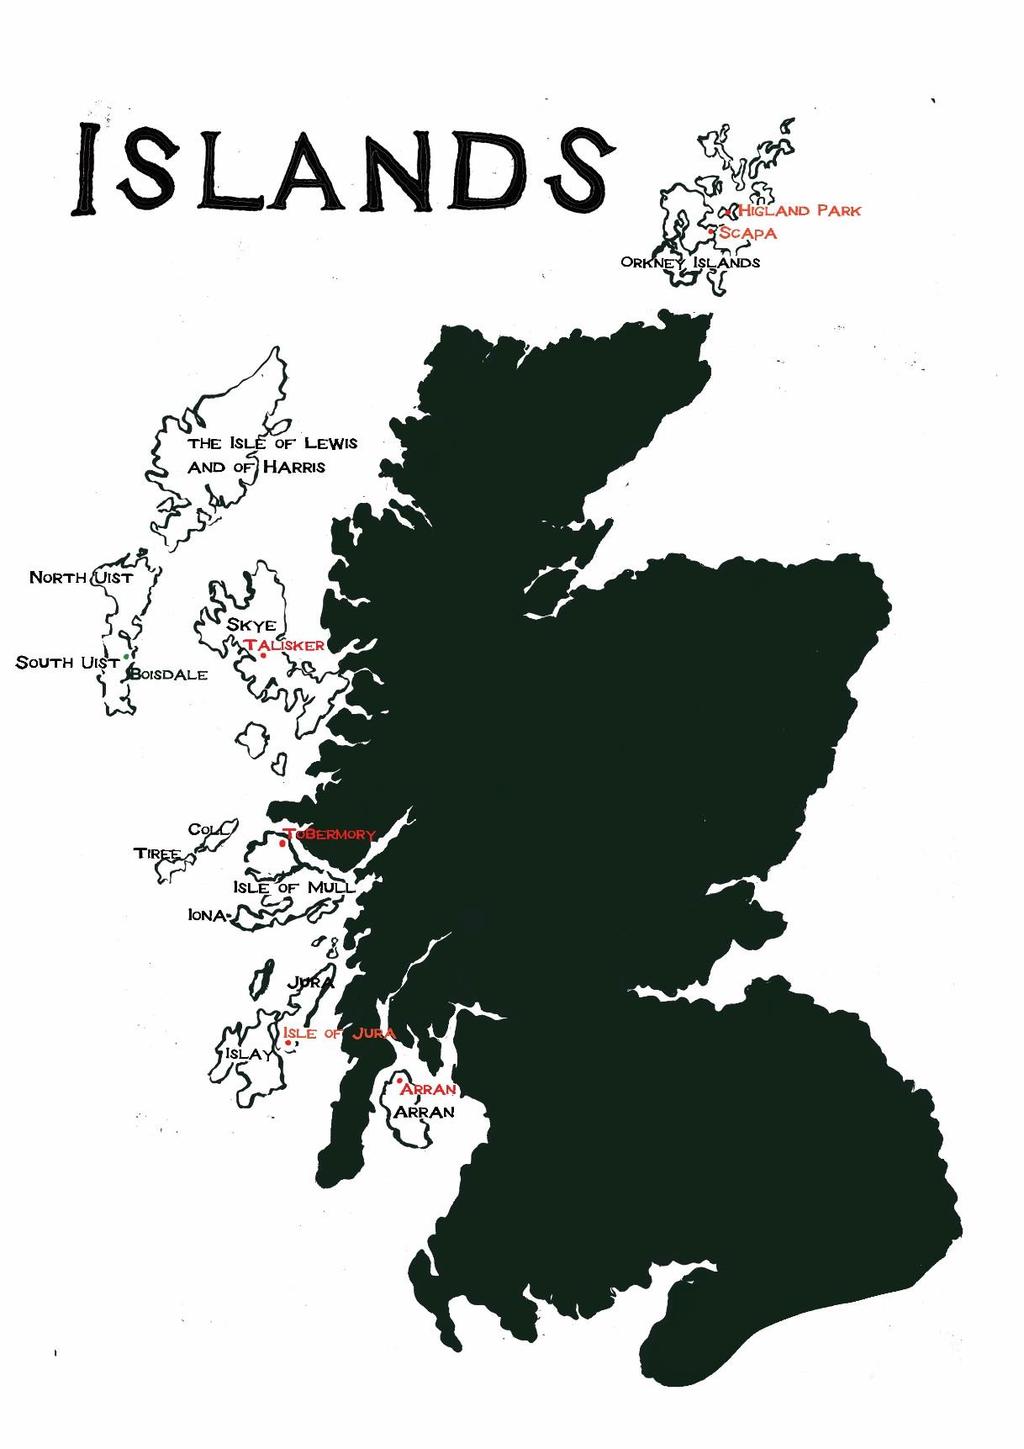 Island single malts is a general term for single malt Scotch whiskies produced on the islands around the perimeter of the Scottish mainland.